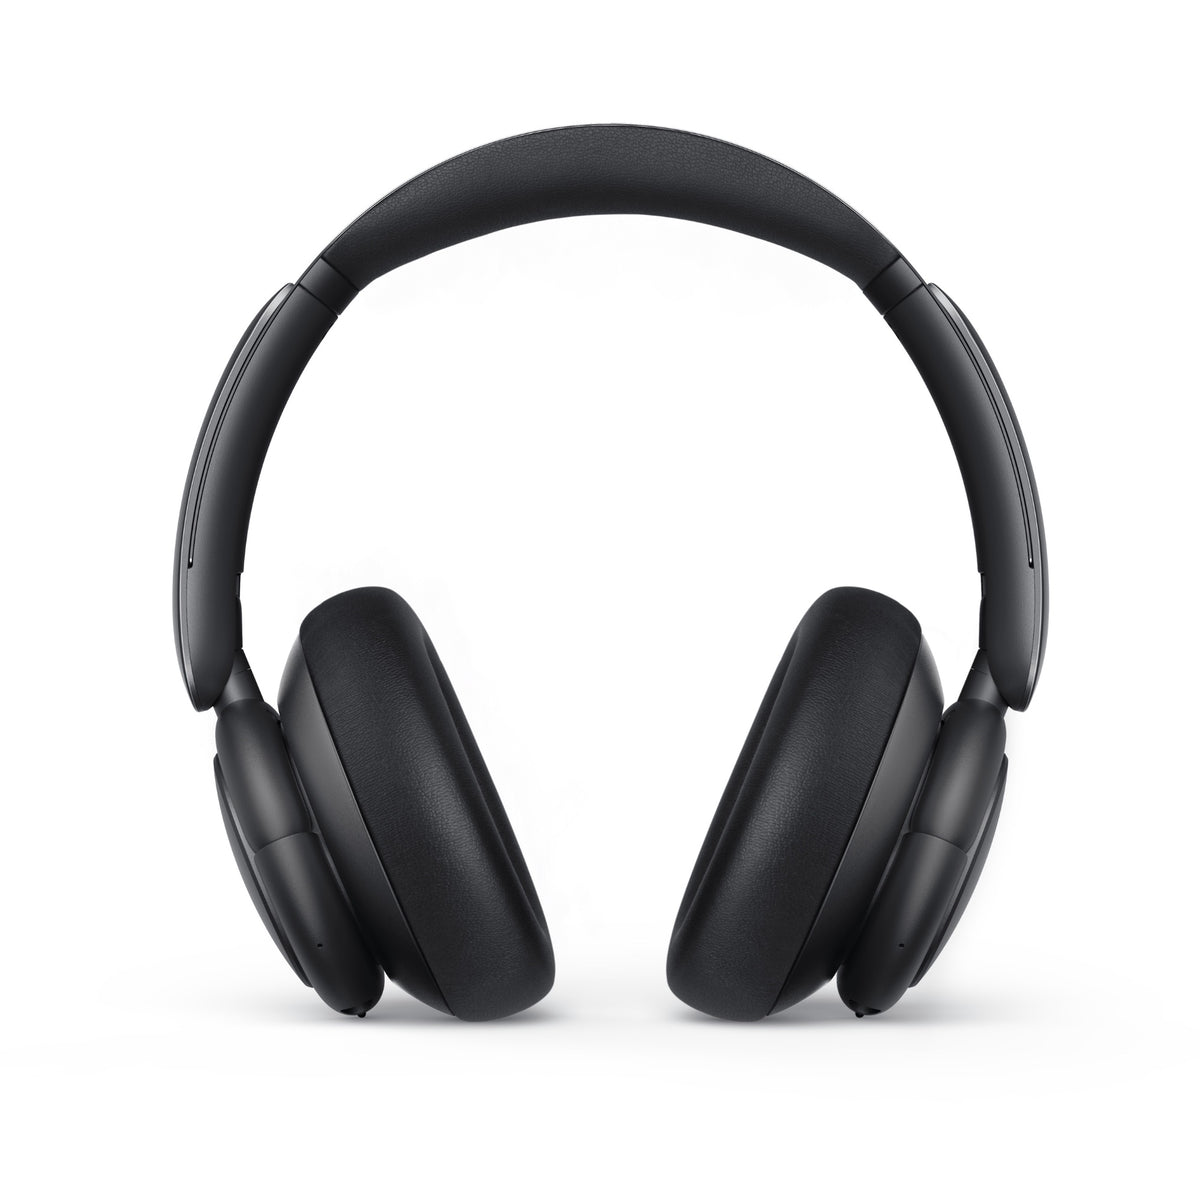 Anker Soundcore Life Tune Bluetooth headphones with Hybrid Active noise cancellation &amp; Hi-Res Sound